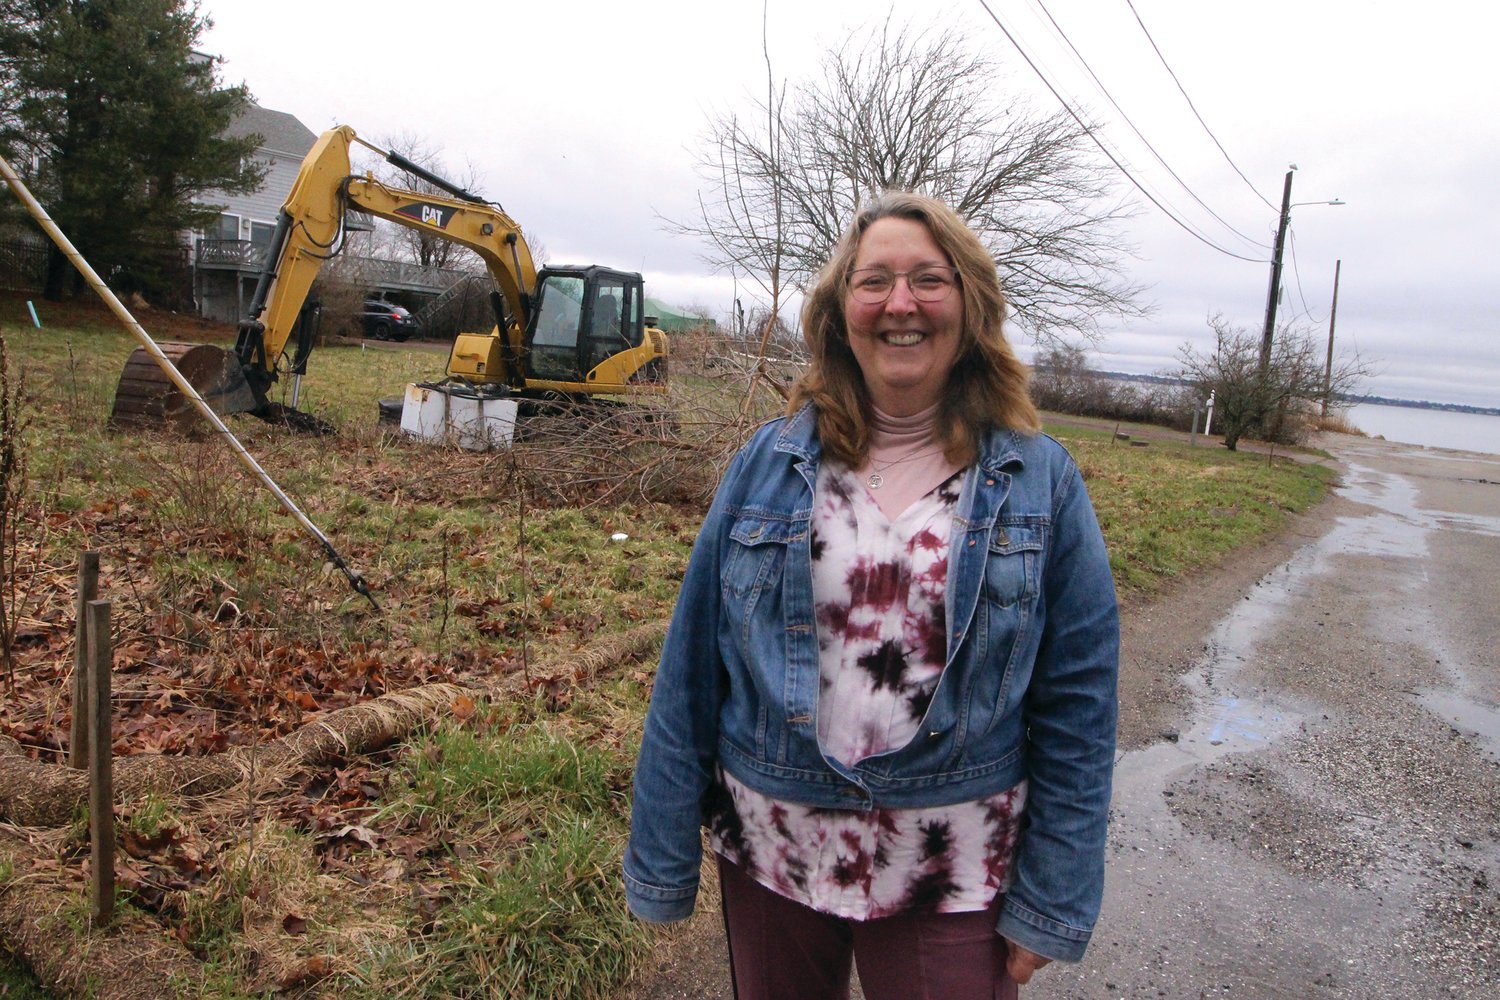 A CAT NEXT DOOR: Jeanne Mutokyle and  the Caterpillar that has been is the adjoining lot for months. (Warwick Beacon photo)